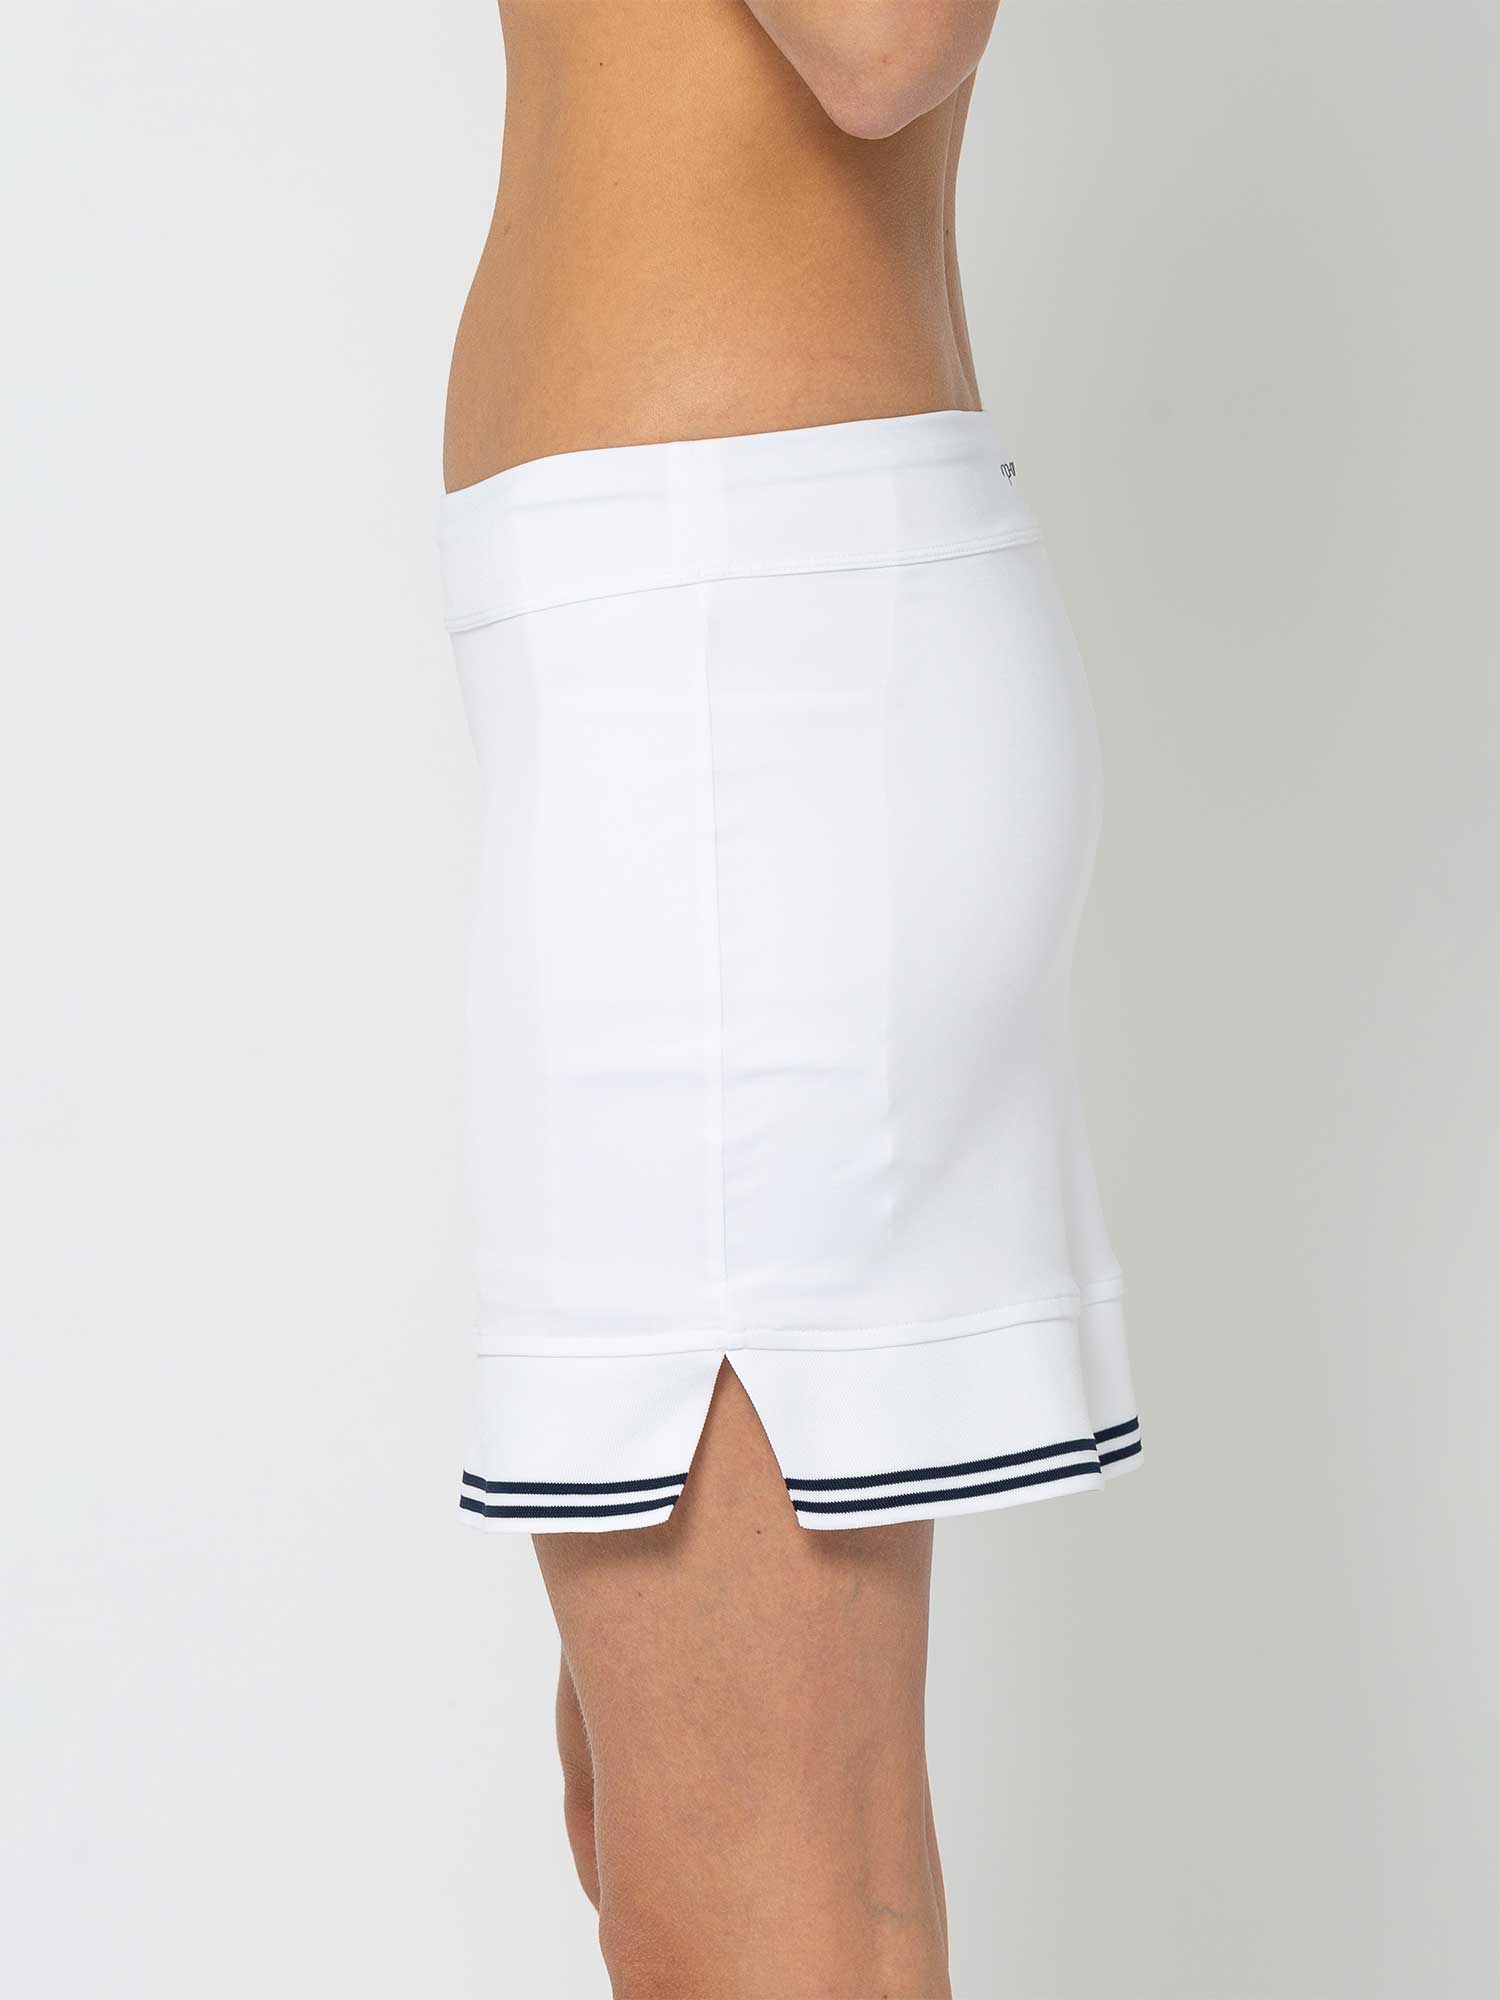 Ace-Your-Match-Tennis-Skirt-White-Black-Side-2